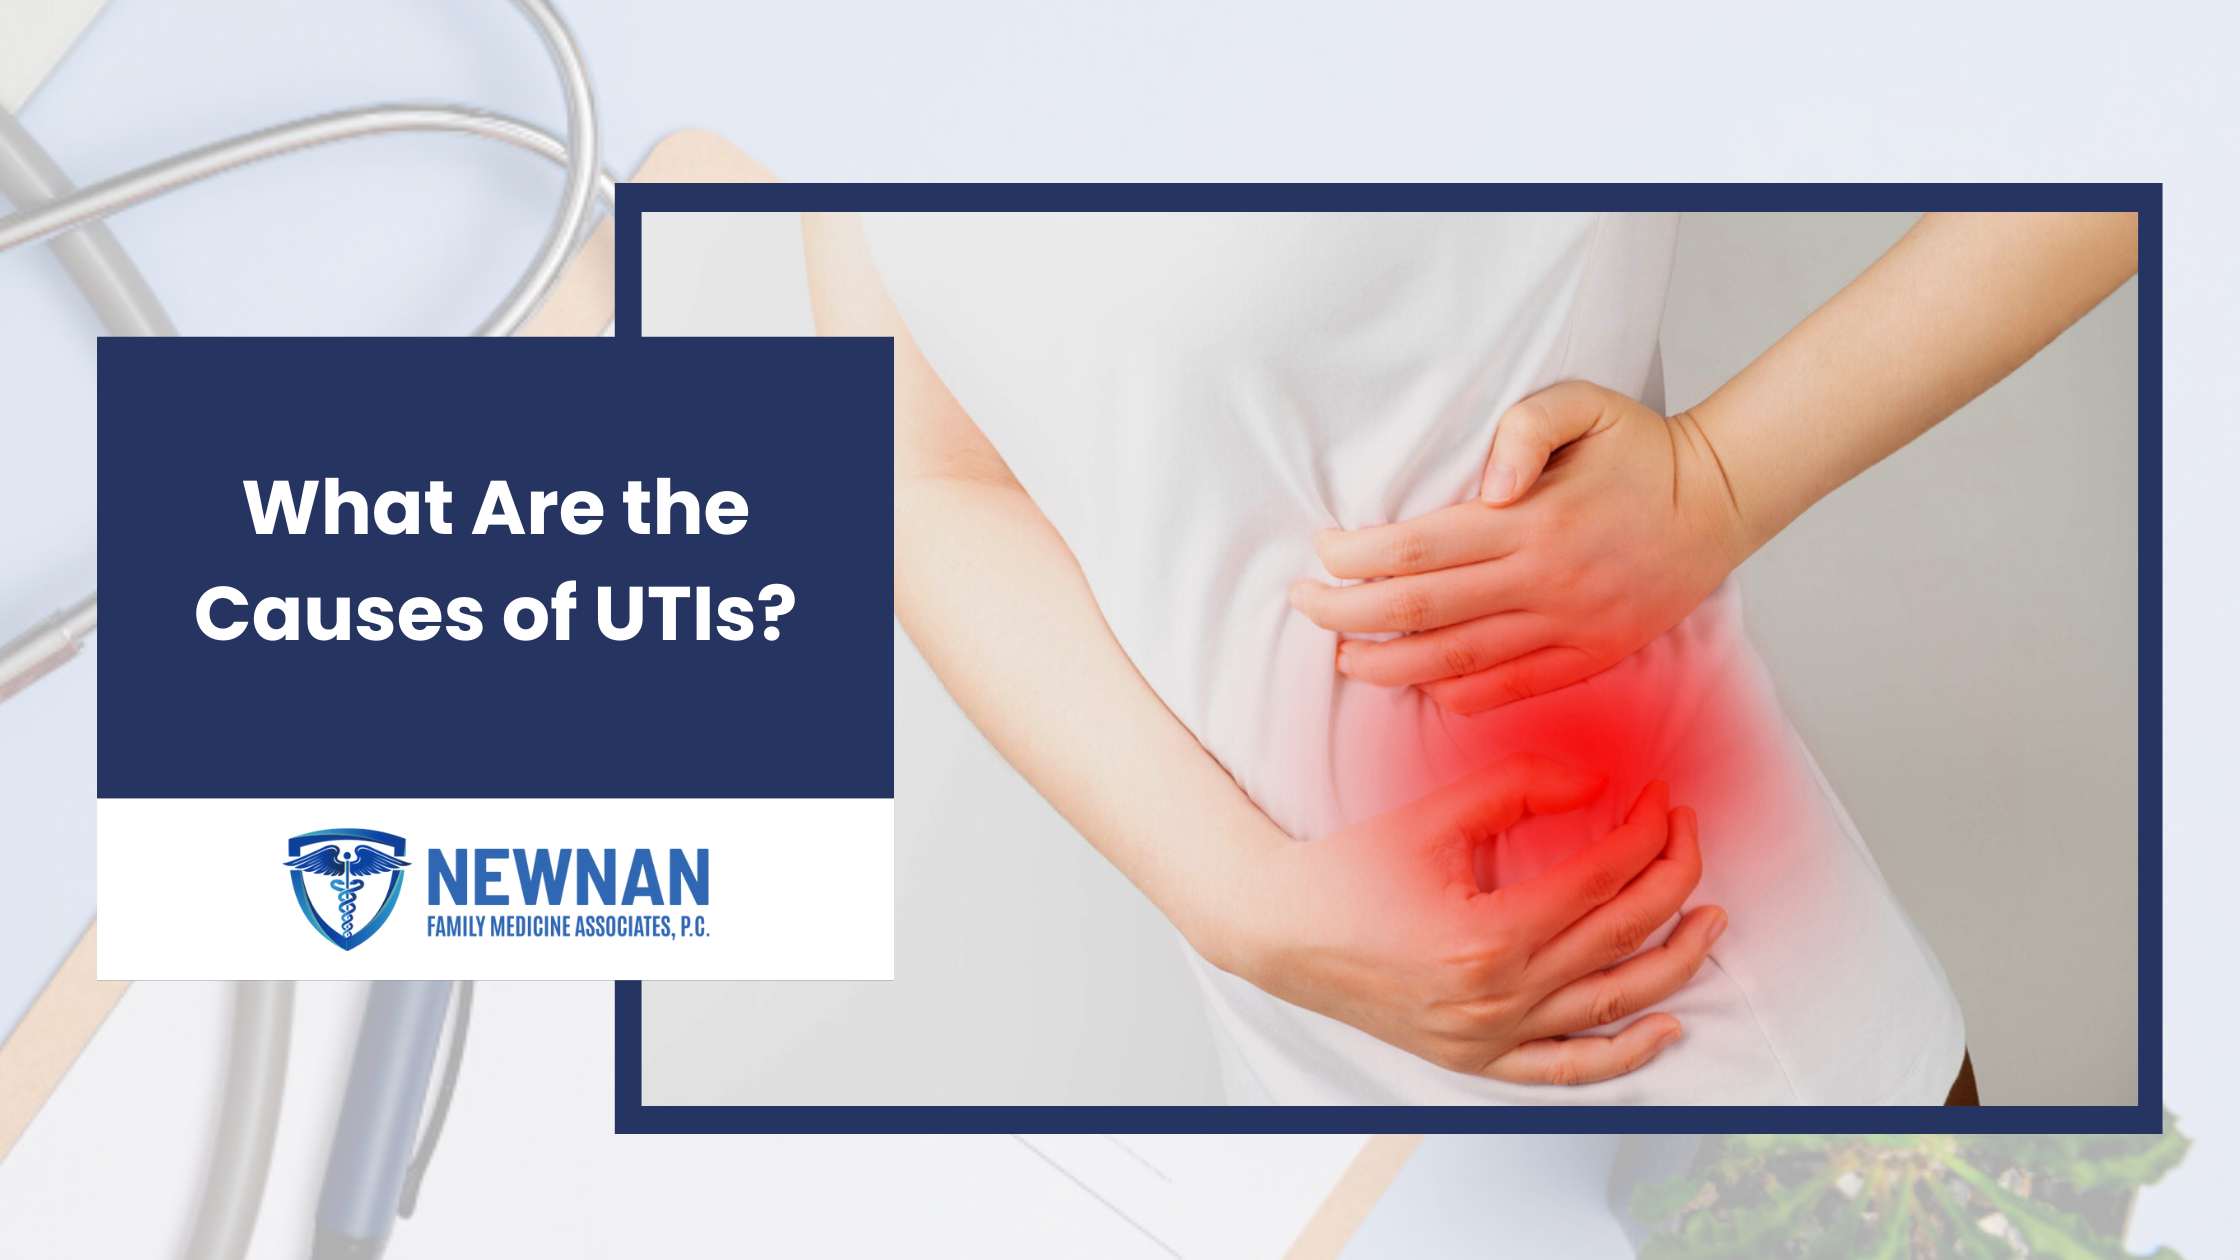 What Are the Causes of UTIs?